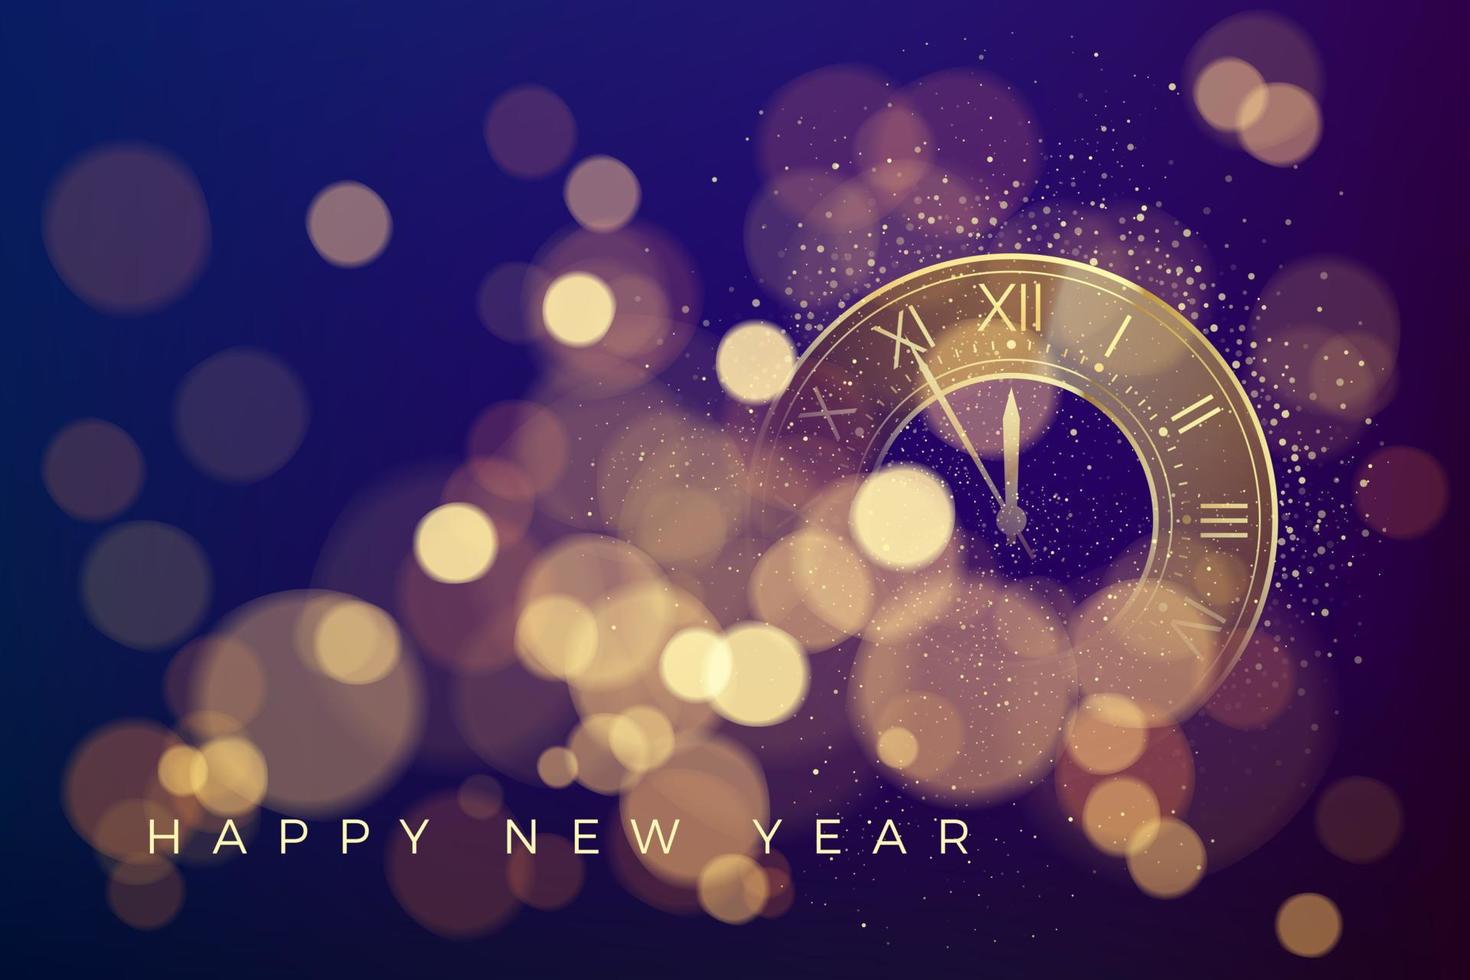 Happy New Year Greeting Card. Countdown to New Year on clock. Lights, sparkles and effect bokeh. Vector illustration